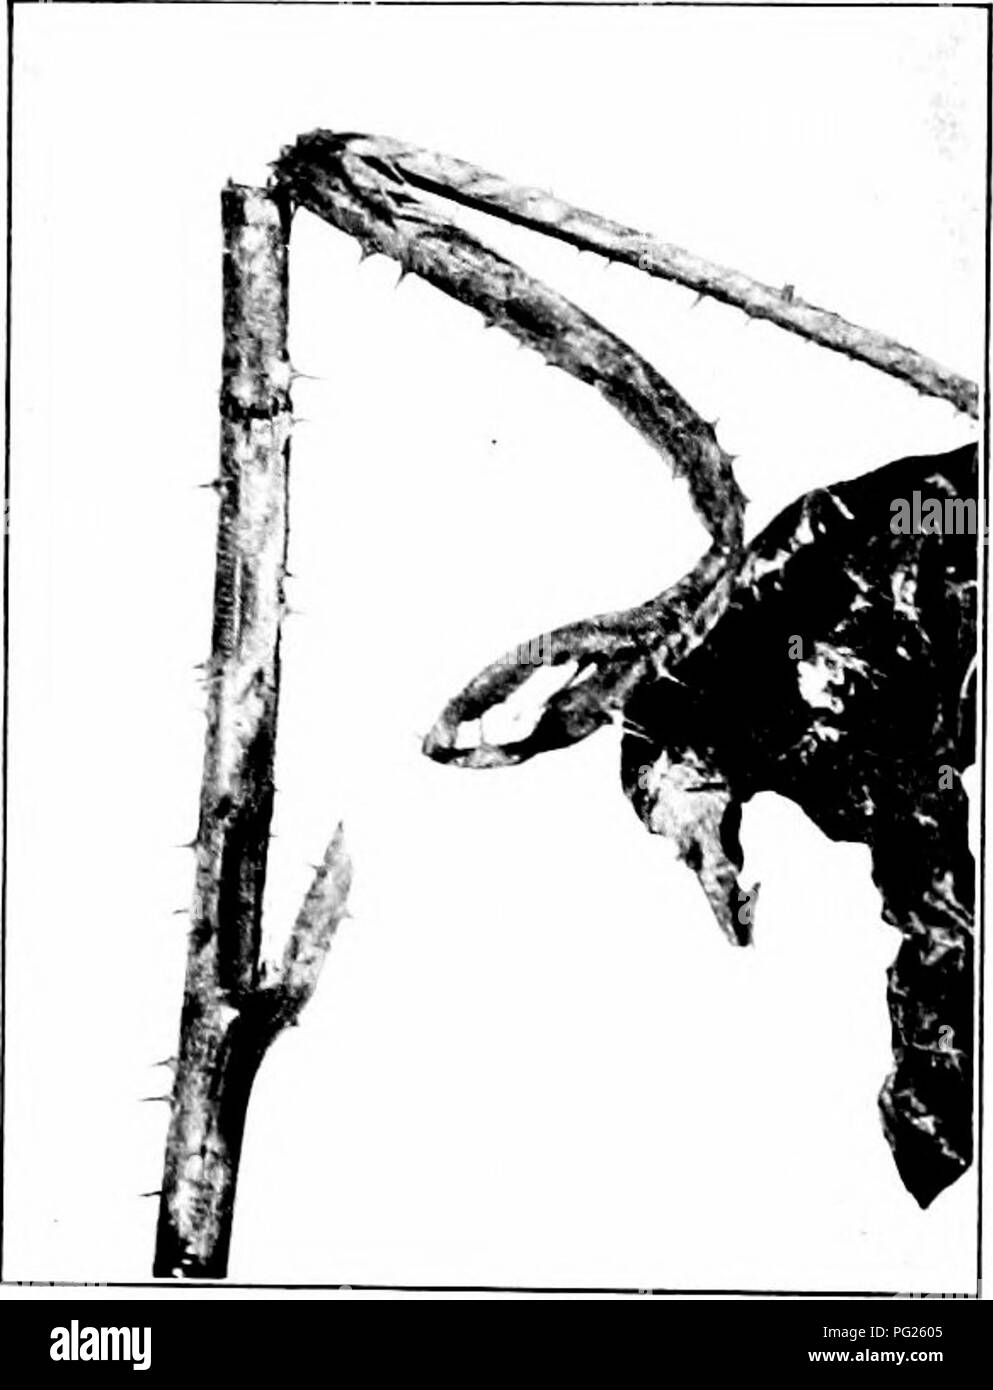 . Injurious insects : how to recognize and control them . Insect pests; Insect pests. Fig. 3123 —Adult of the Rasp- Fig. 324. —Vork of the Raspherry berrA&quot; Cane-liorer. Shghtl.' eu- Cane-borer. OriginaL larged. Original. and has a small brown head. Two years are required for the entire life round. If a cane that has wilted is examined closely, it will be found that the beetle has girdled it at two points -with a row of punctures. The egg is laid between these two rows. Remove and destroy the upper parts of infested canes as soon as the presence of the insect is discovered. If this work  Stock Photo